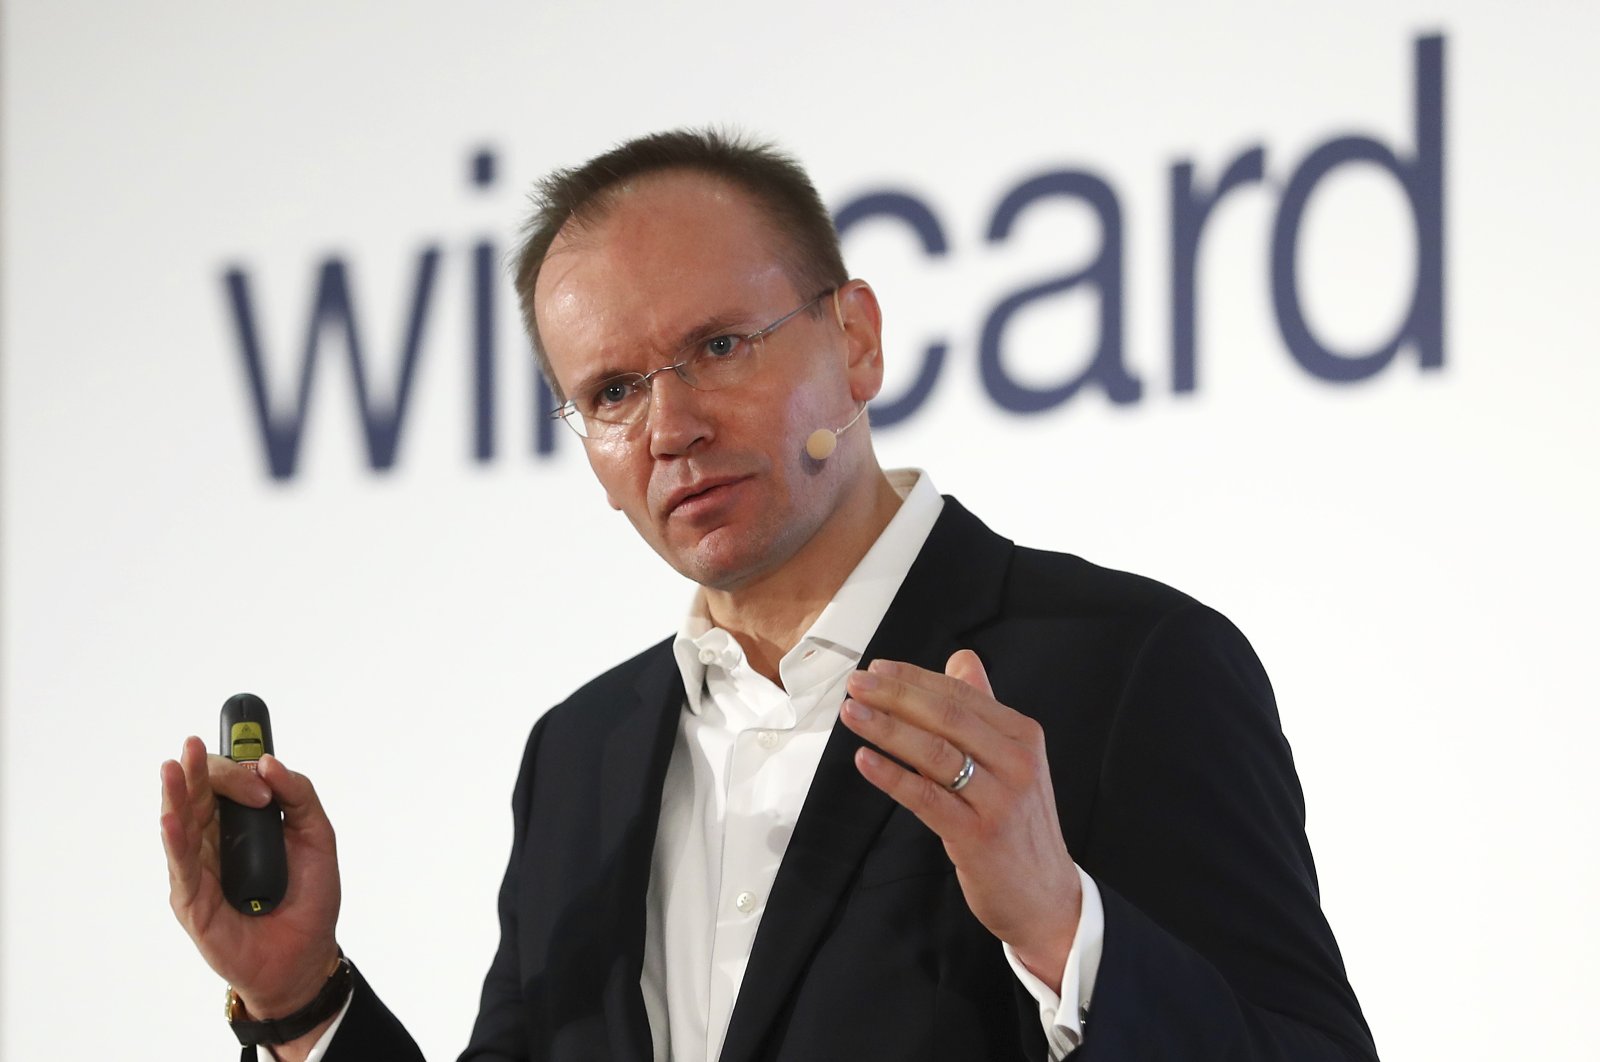 Markus Braun, CEO of financial services company Wirecard, attends the earnings press conference in Munich, Germany, April 25, 2019. (AP Photo)